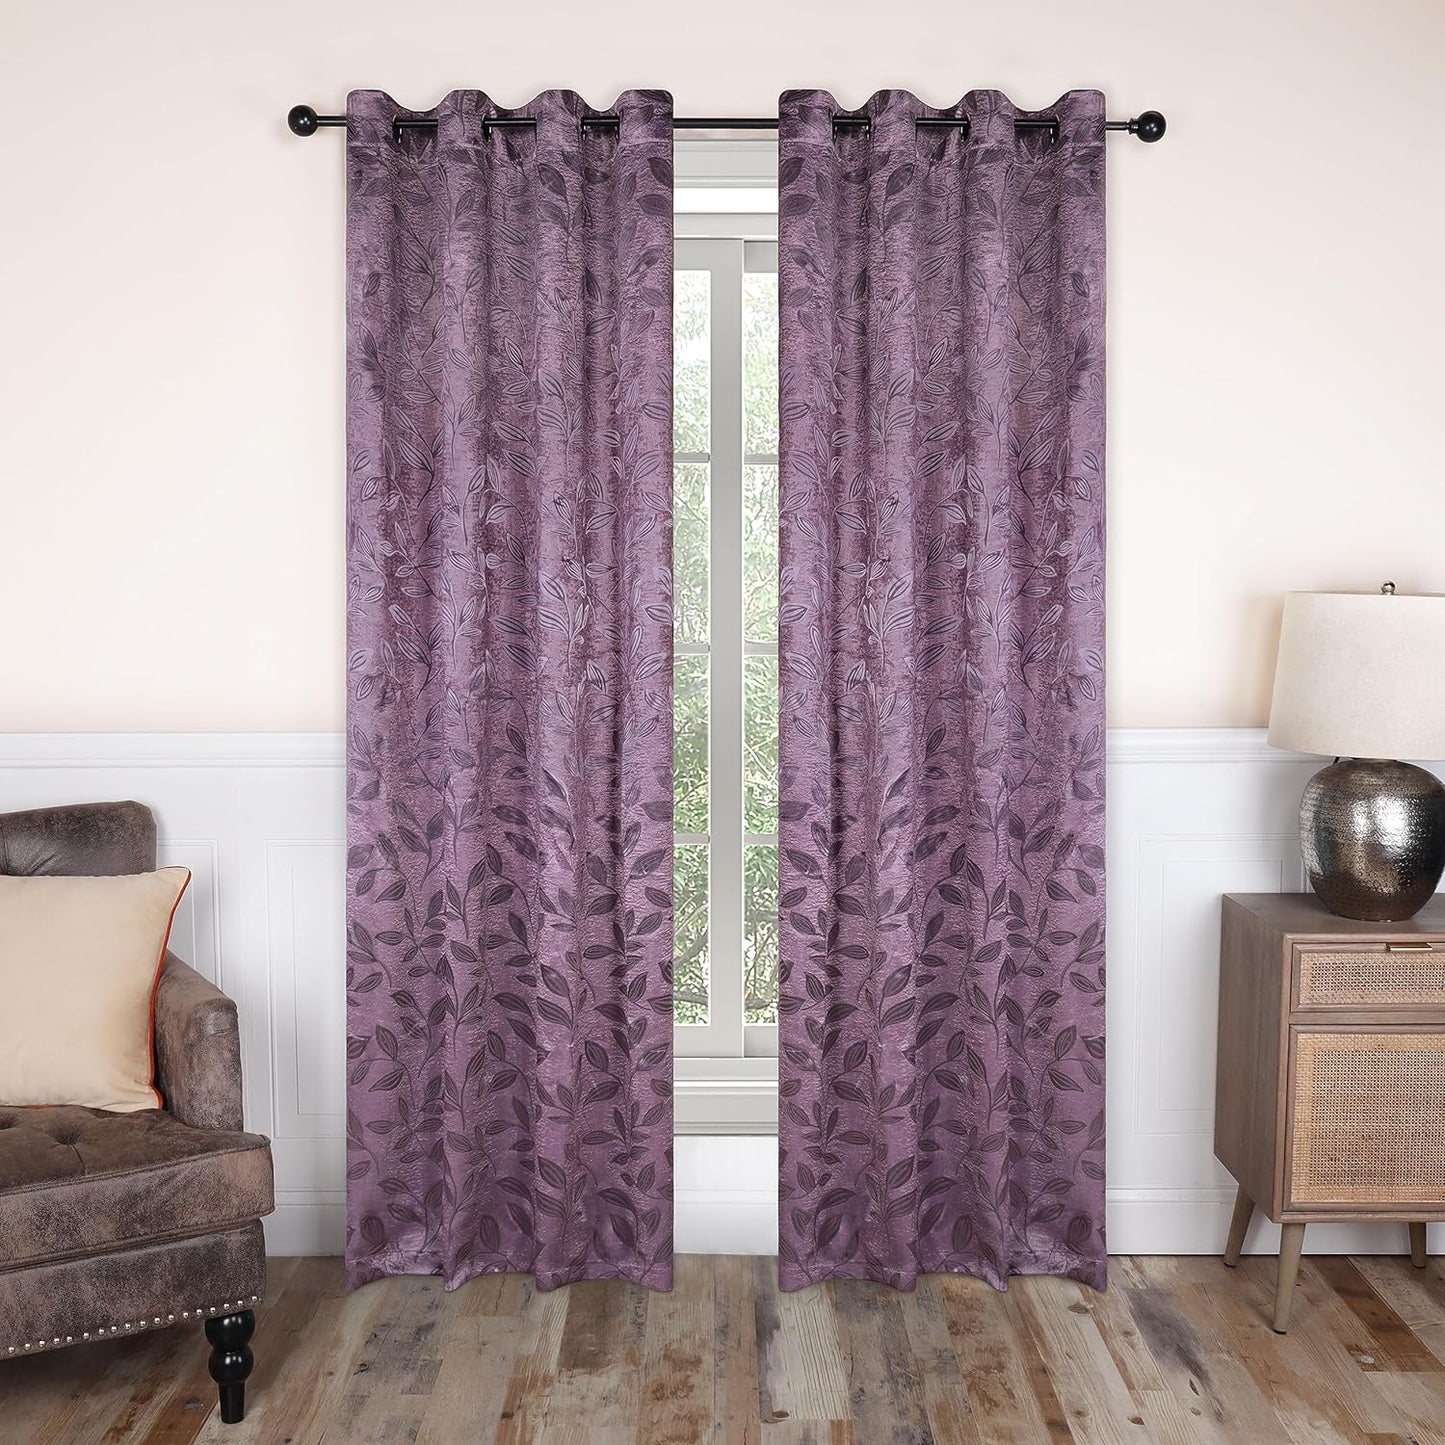 Superior Blackout Curtains, Room Darkening Window Accent for Bedroom, Sun Blocking, Thermal, Modern Bohemian Curtains, Leaves Collection, Set of 2 Panels, Rod Pocket - 52 in X 63 In, Nickel Black  Home City Inc. Wisteria 52 In X 72 In (W X L) 